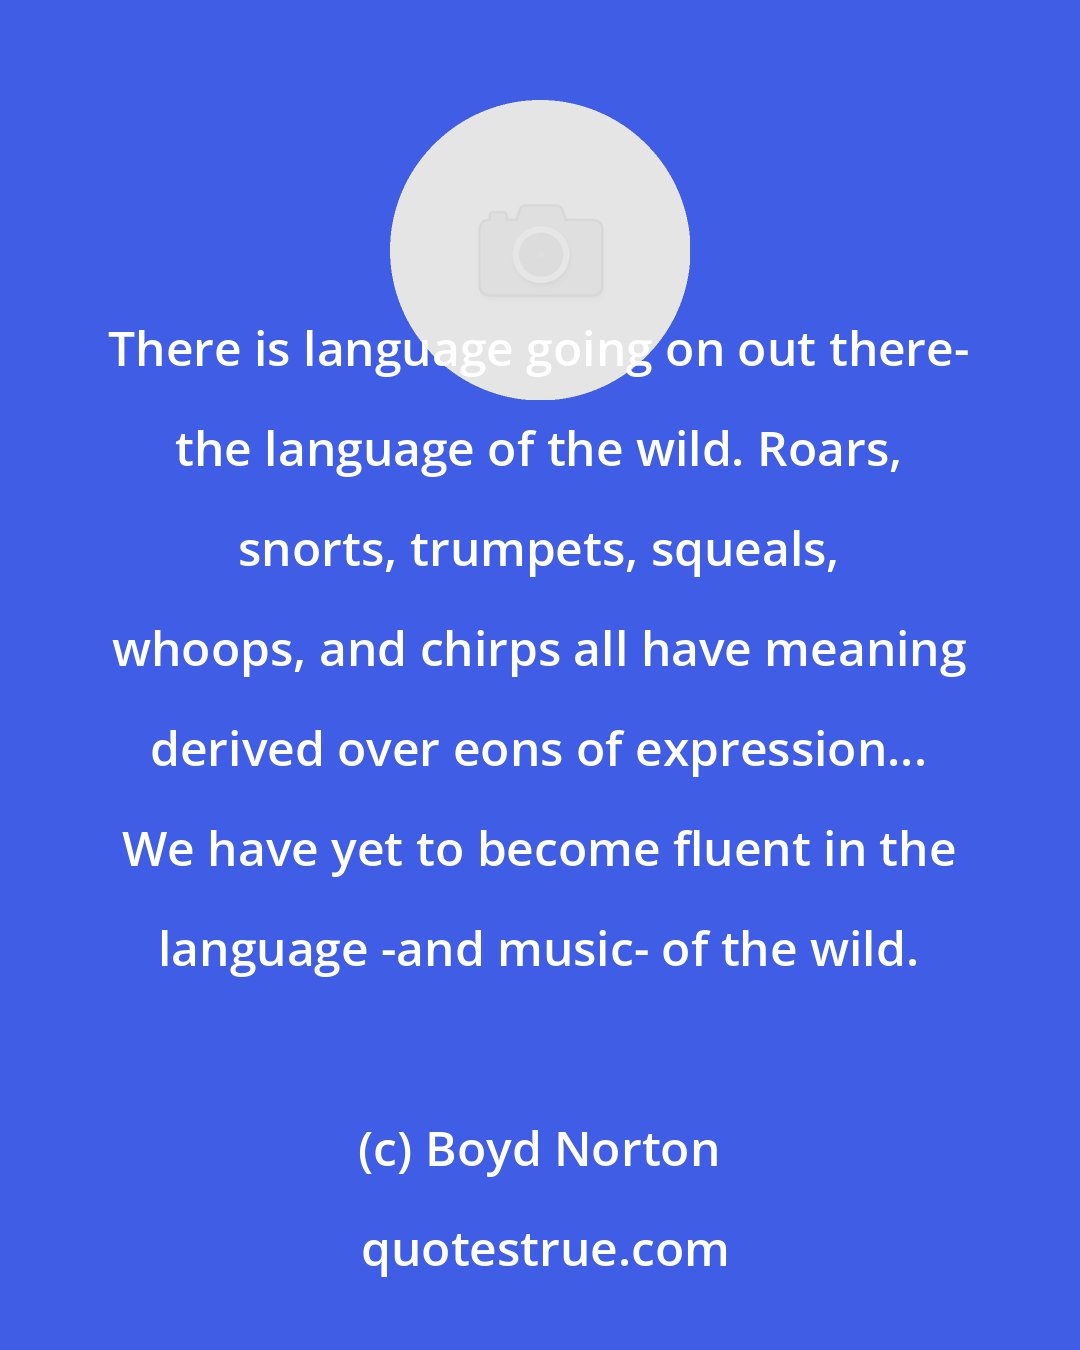 Boyd Norton: There is language going on out there- the language of the wild. Roars, snorts, trumpets, squeals, whoops, and chirps all have meaning derived over eons of expression... We have yet to become fluent in the language -and music- of the wild.